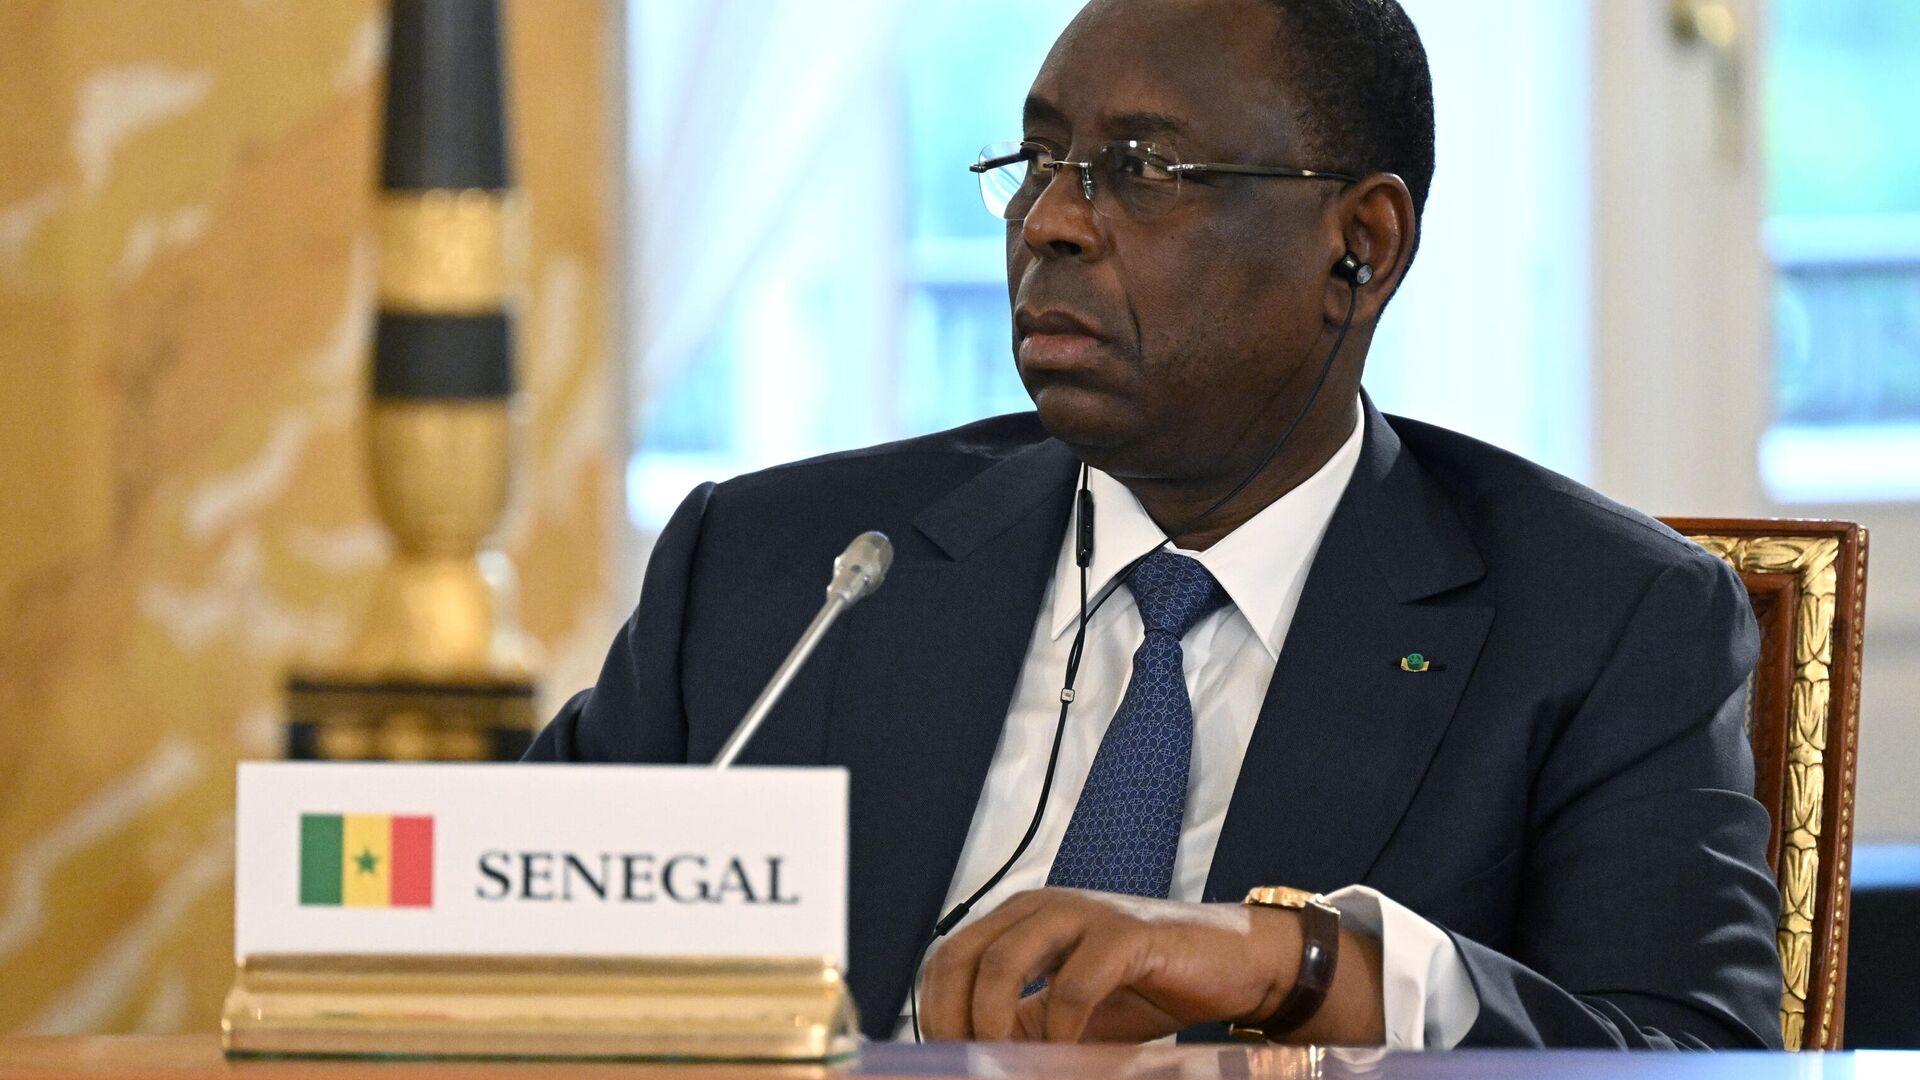 President of the Republic of Senegal Macky Sall at a meeting between Russian President Vladimir Putin and leaders of several African states - Sputnik Africa, 1920, 18.06.2023